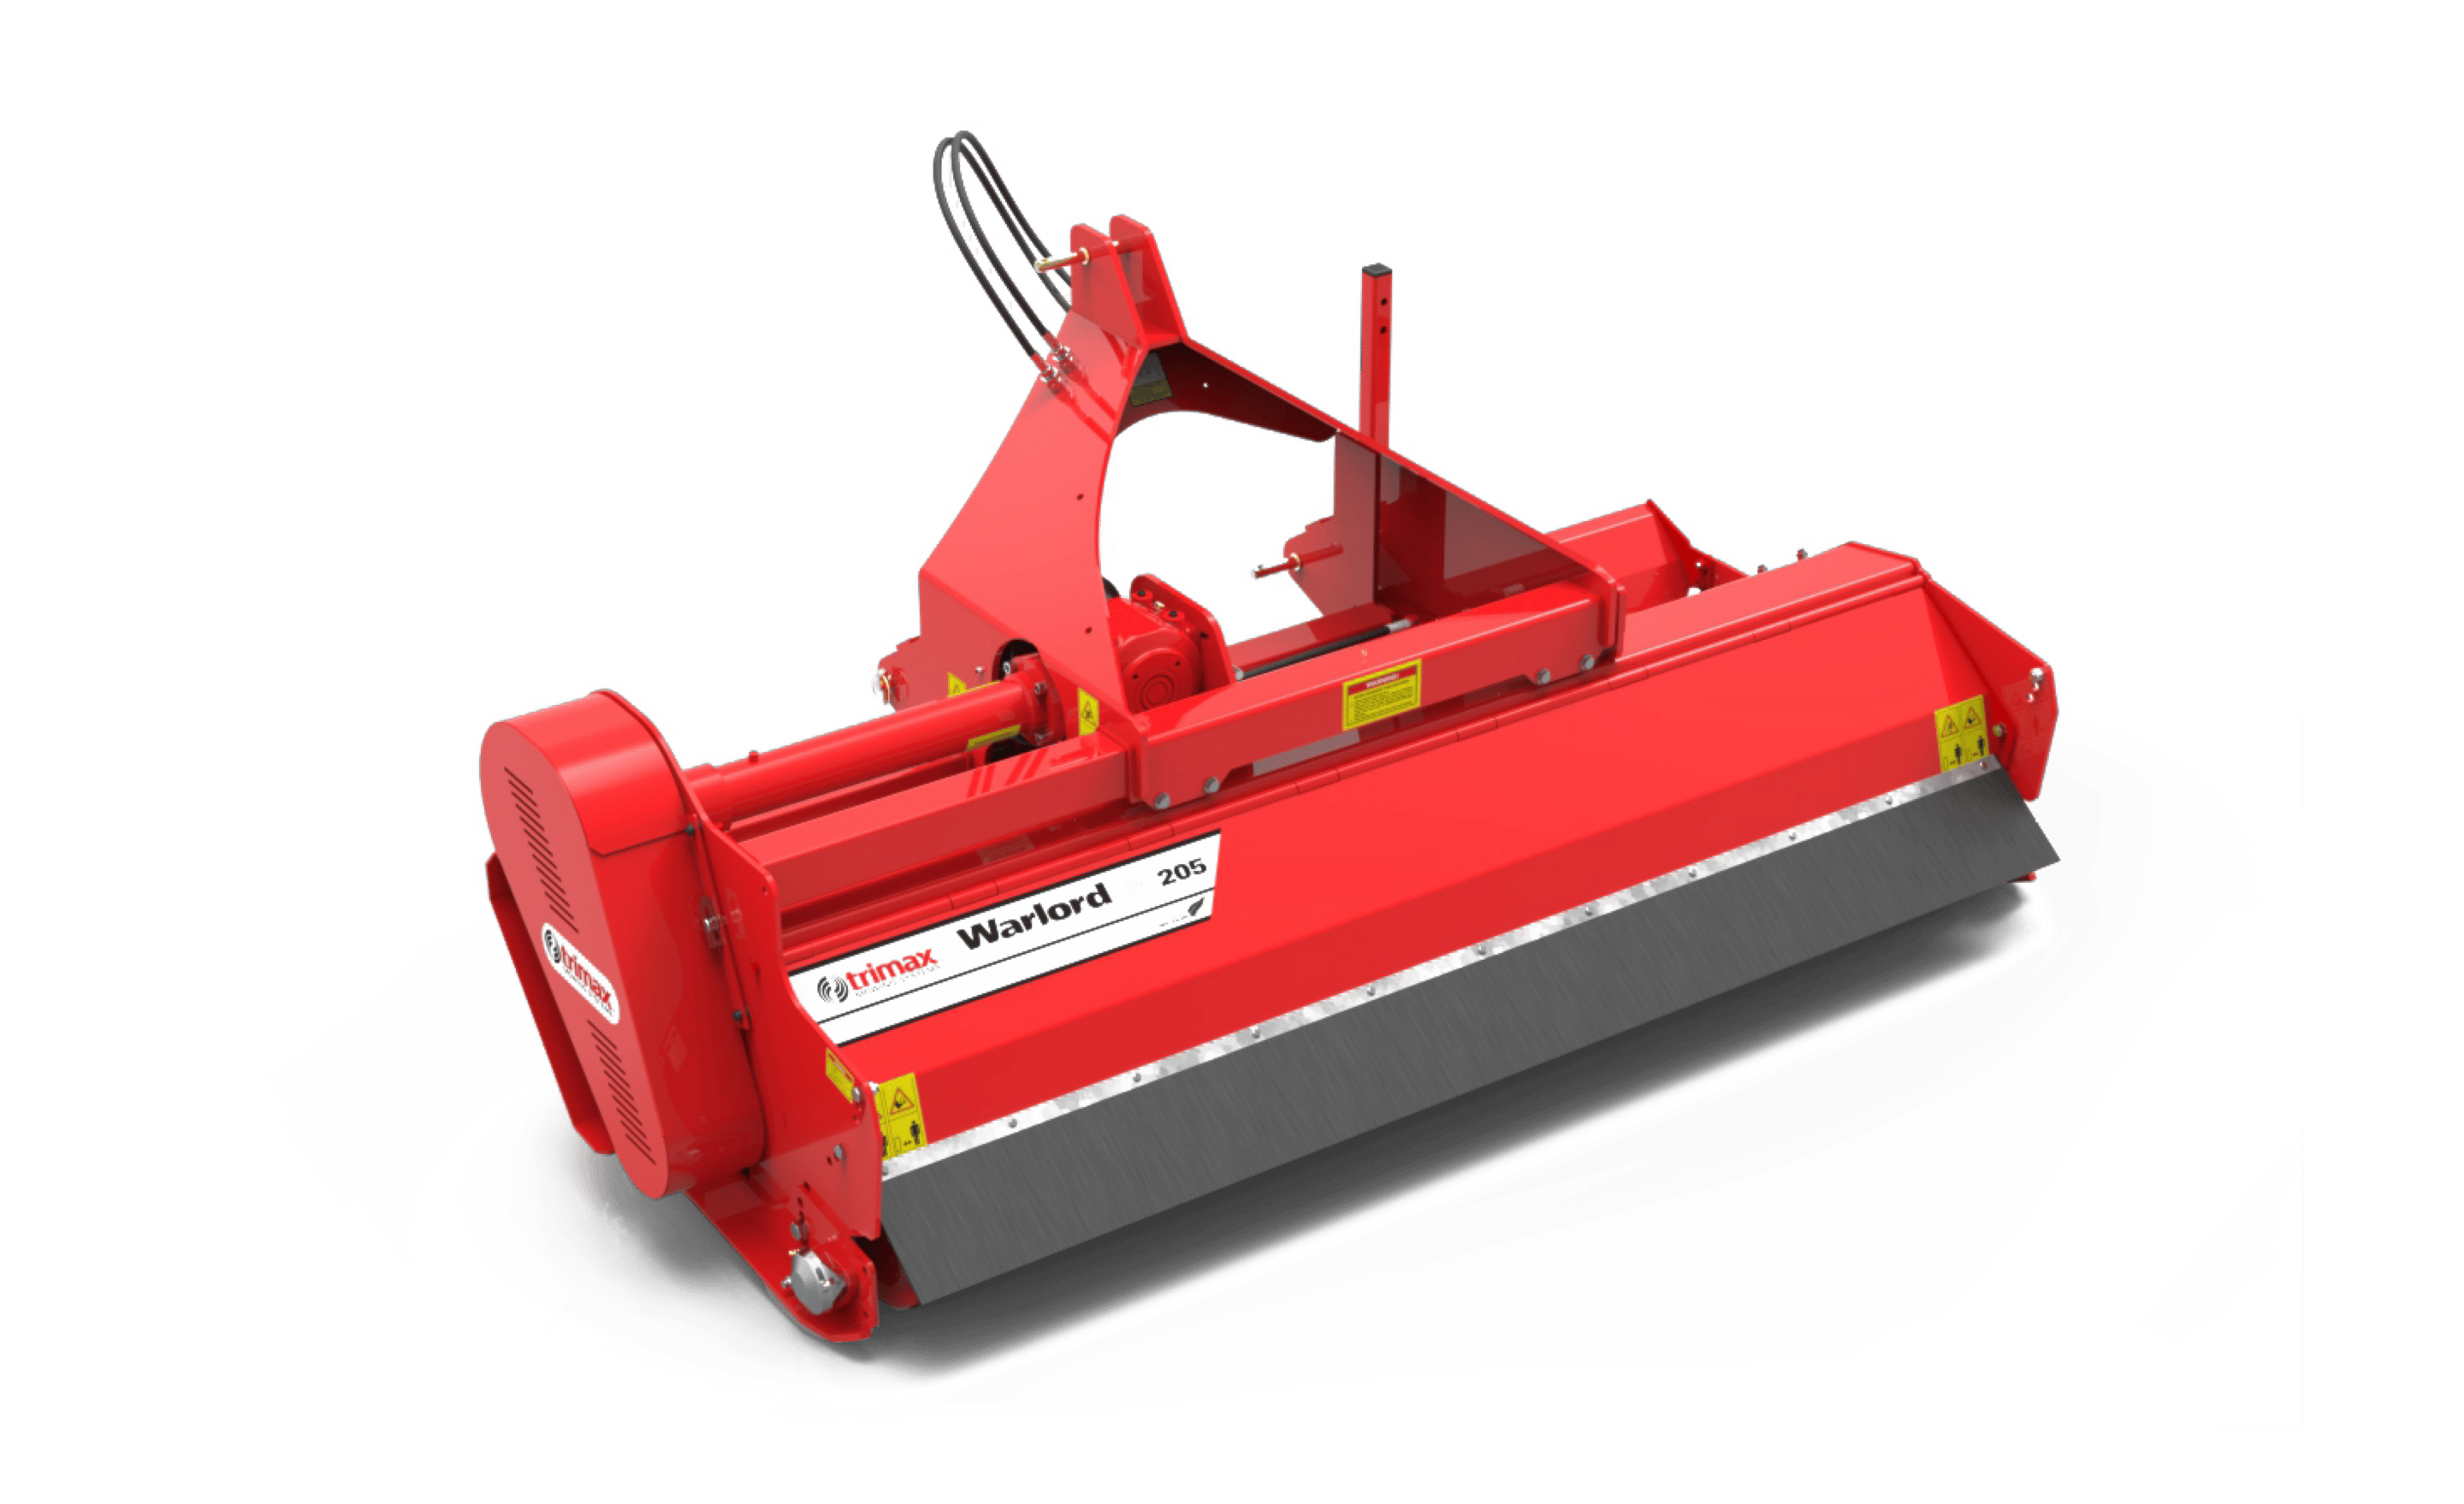 Warlord S3-205 Mower Red